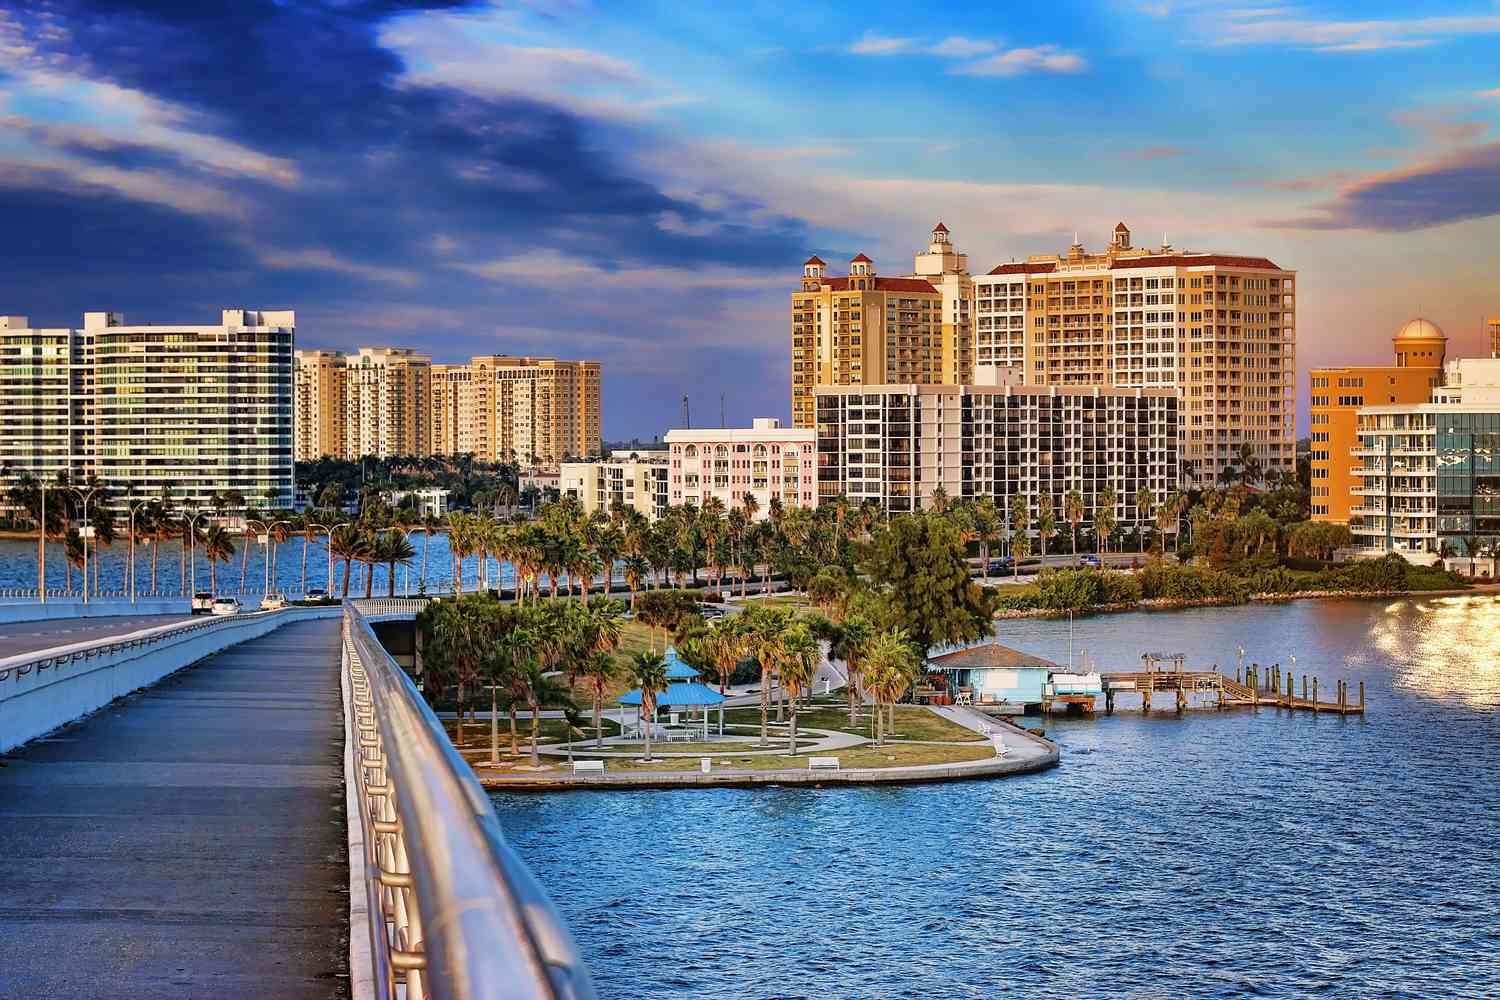 Discovering Vibrant Nights: Sarasota’s Exciting Nightlife and Entertainment Scene